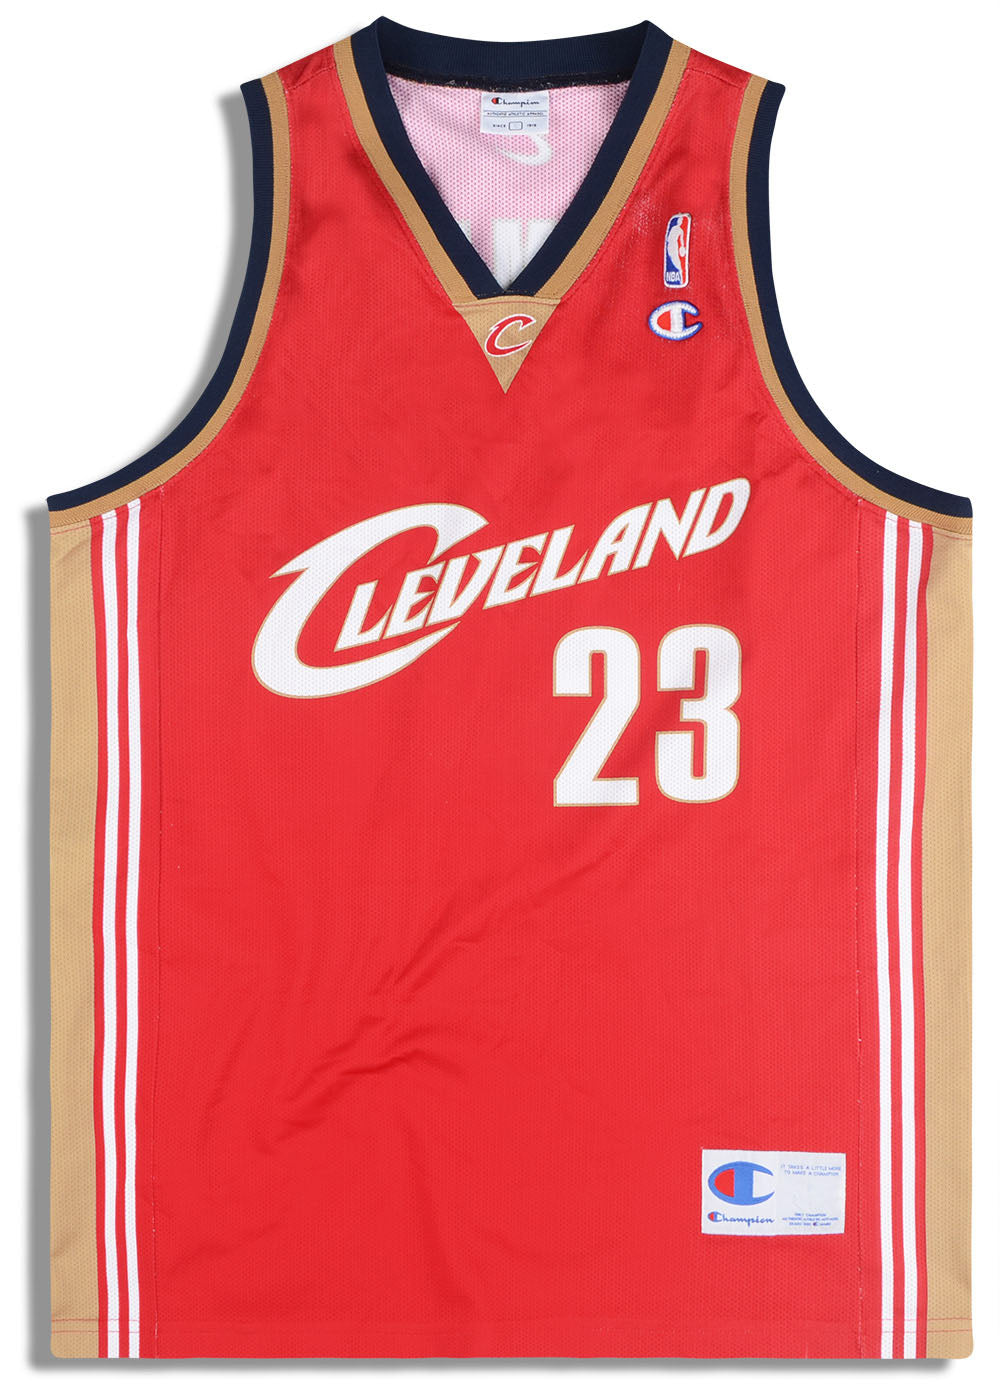 2003-10 CLEVELAND CAVALIERS JAMES #23 CHAMPION JERSEY (AWAY) M